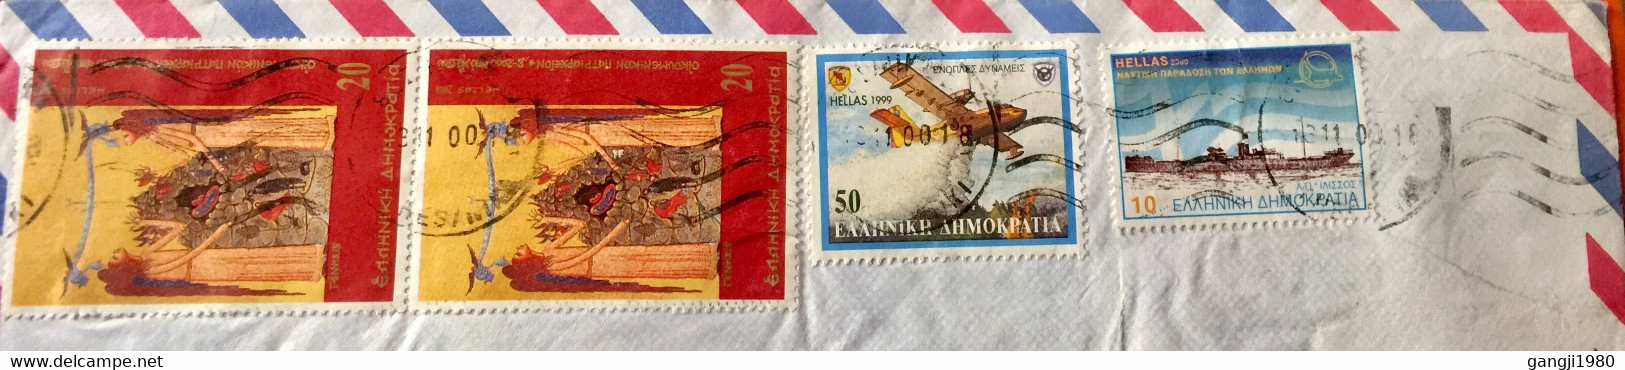 GREECE 2000, USED AIRMAIL COVER TO INDIA,4 STAMPS ,SHIP ,AEROPLANE,ART, PAINTING,WOMEN,GIRLS,THESSALONIKI,CANCELLATION - Covers & Documents